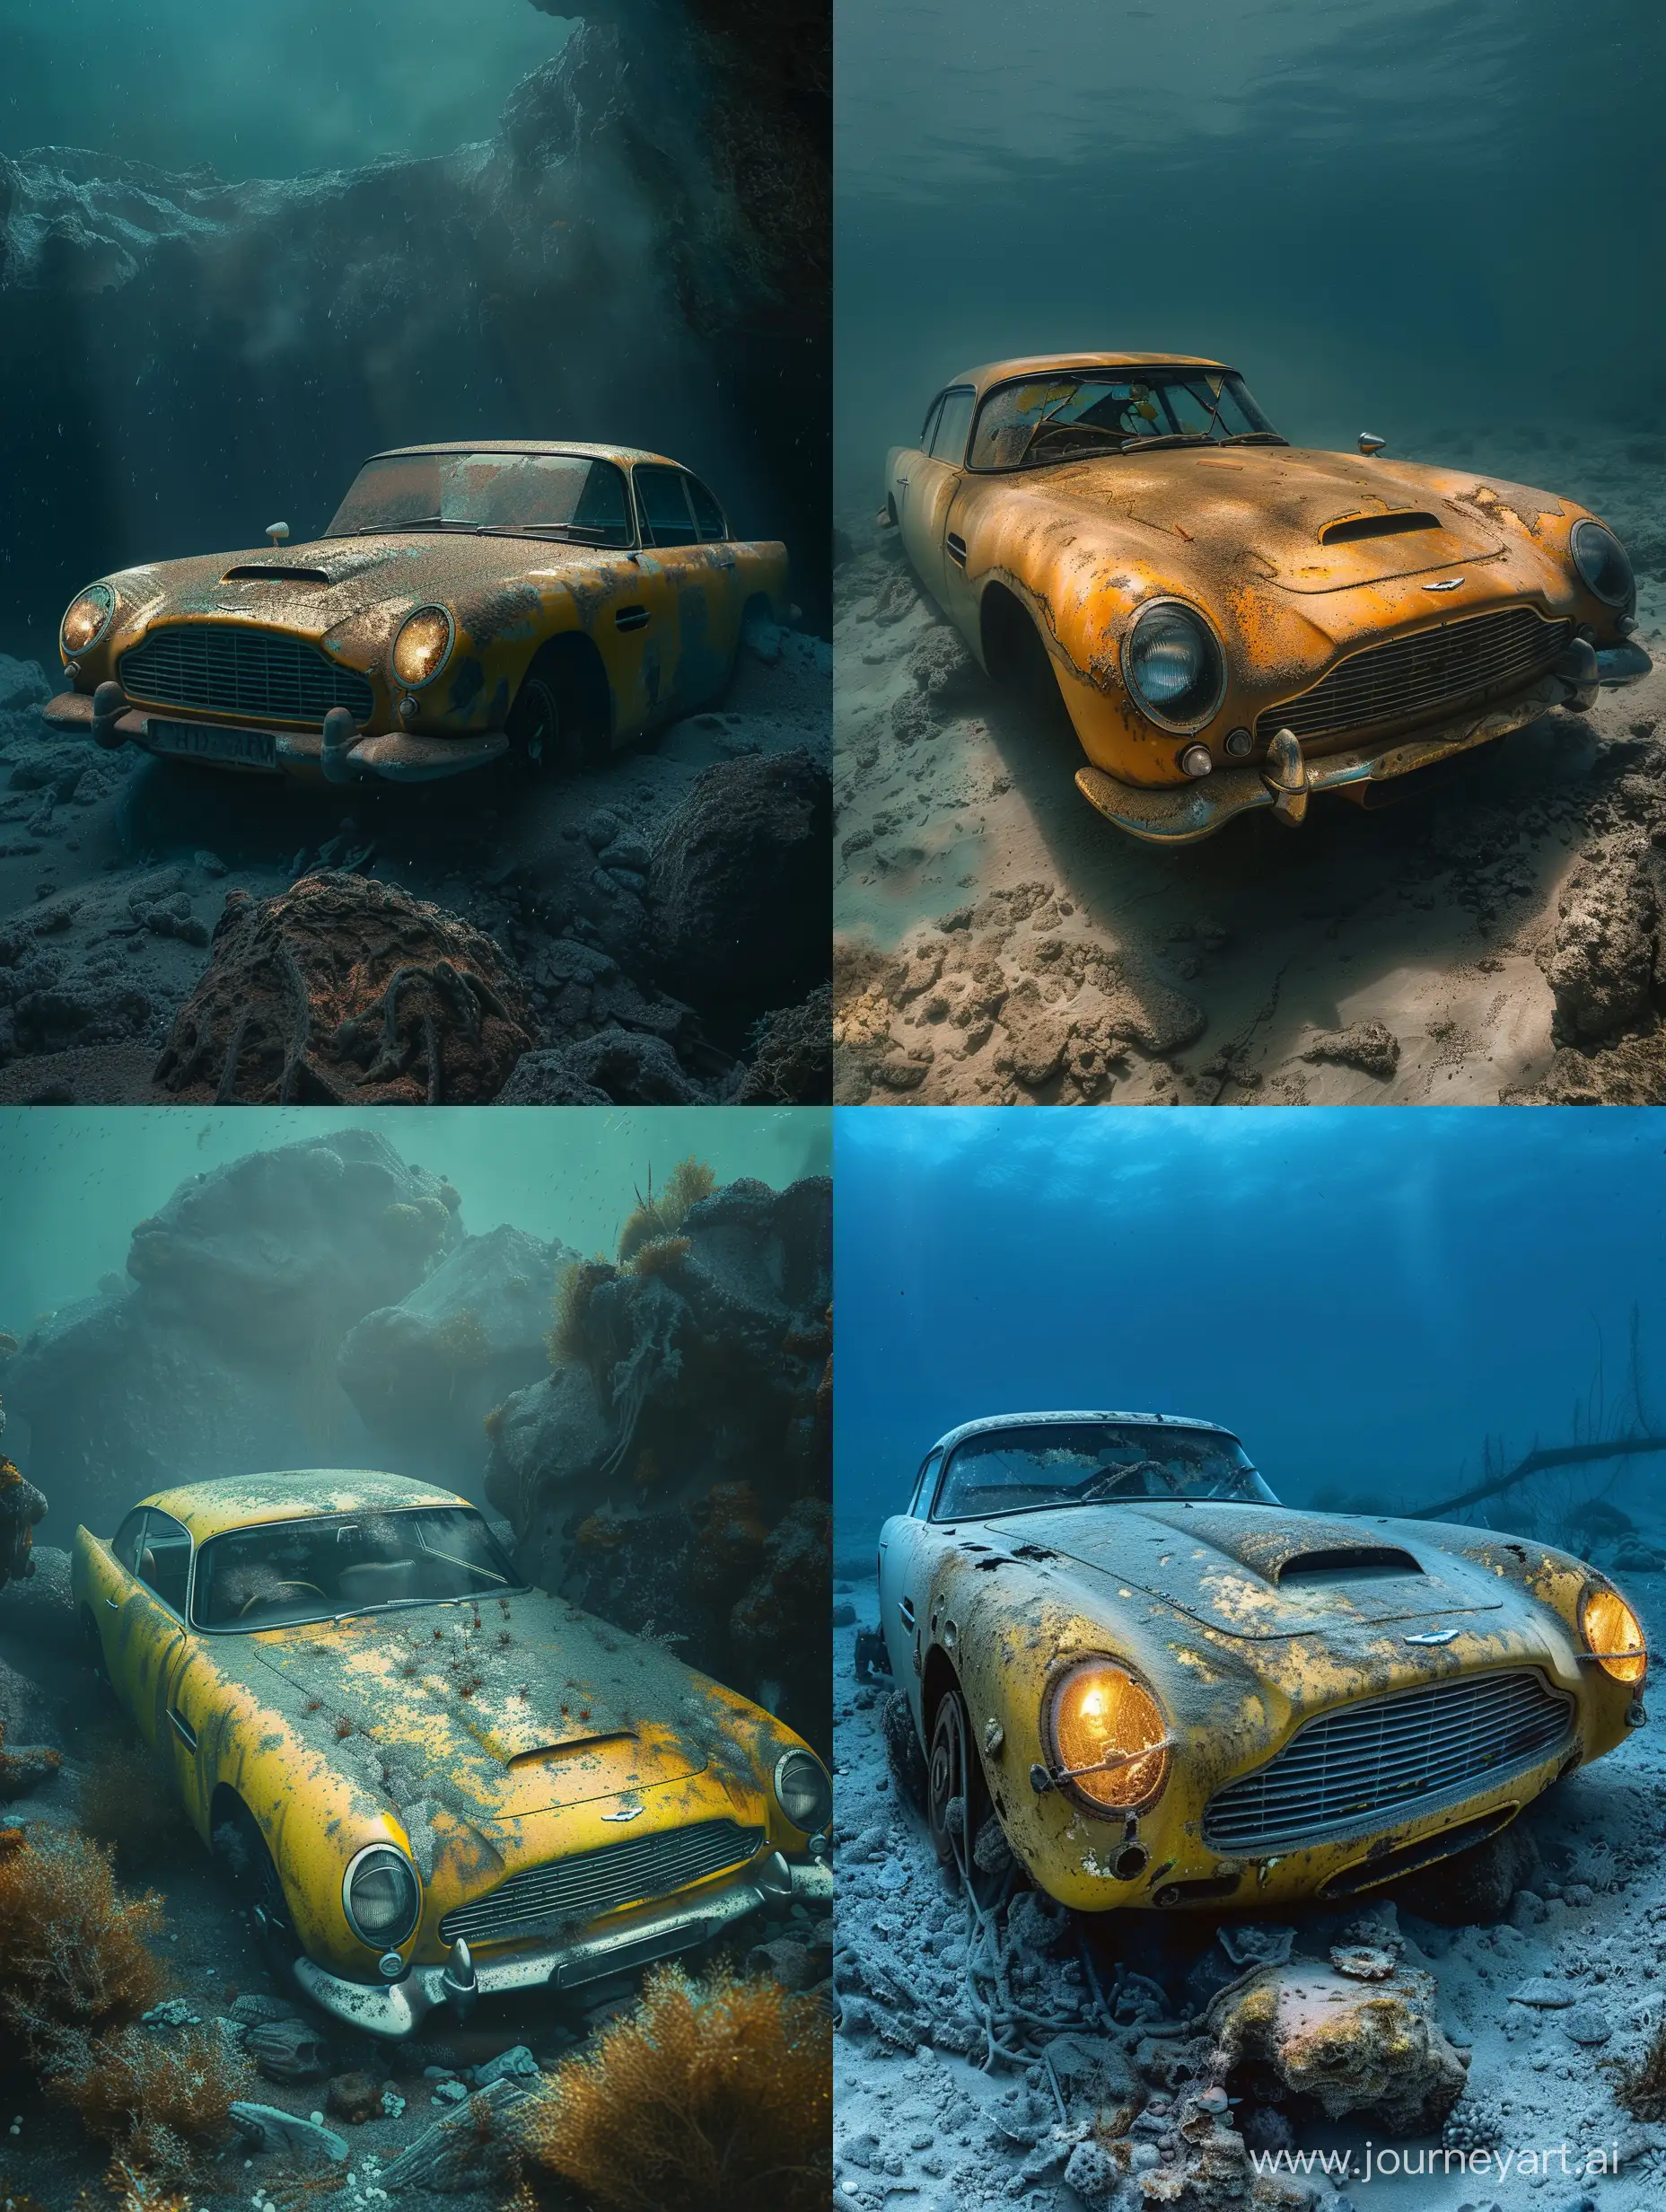 Underwater-Exploration-Rusty-Yellow-Aston-Martin-Car-Ventures-the-Seabed